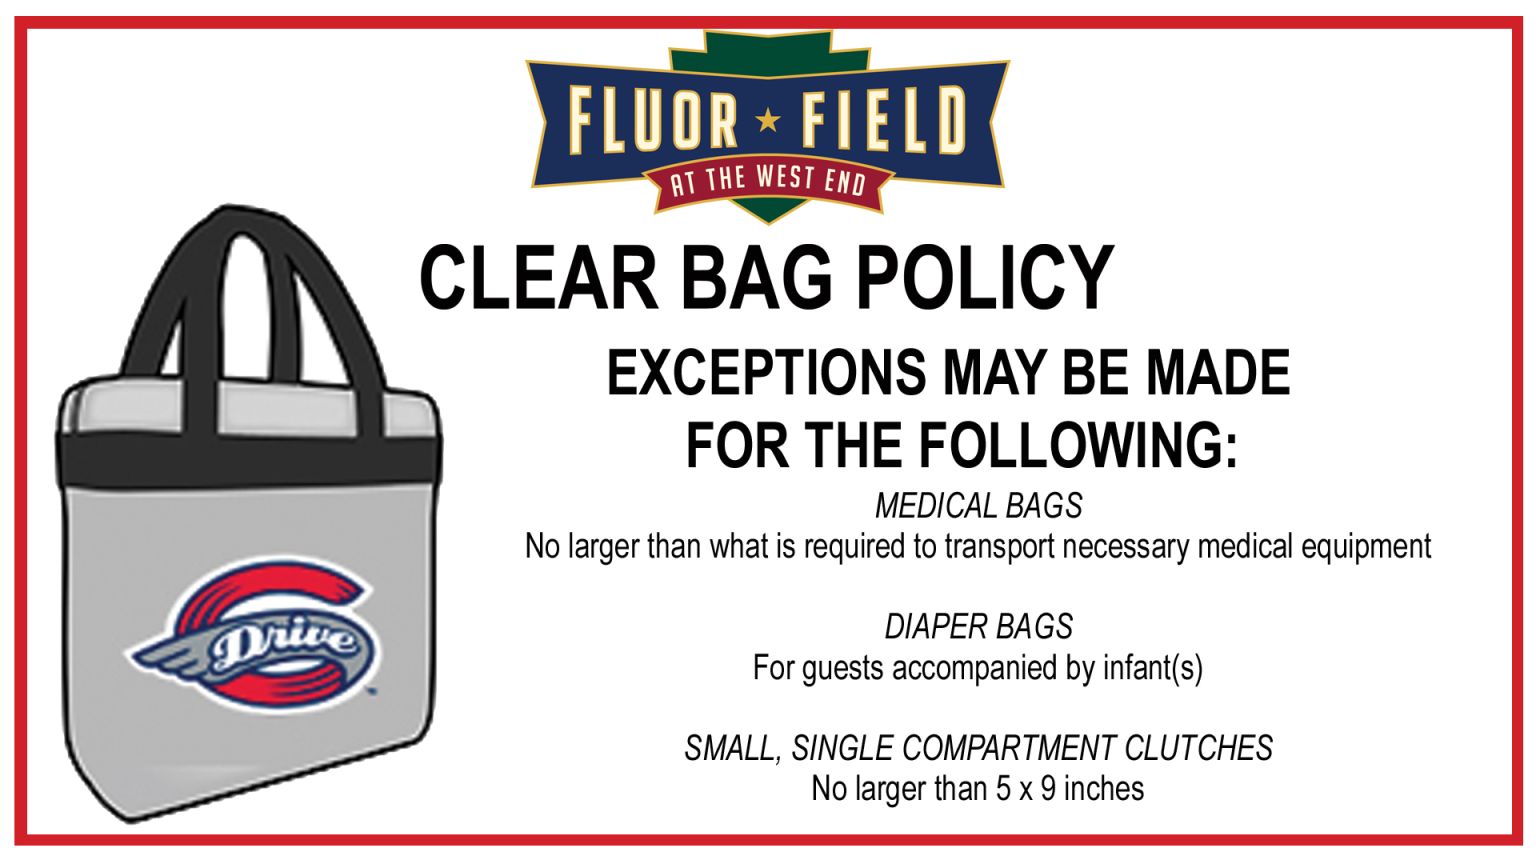 Fluor Field Bag Policy Drive